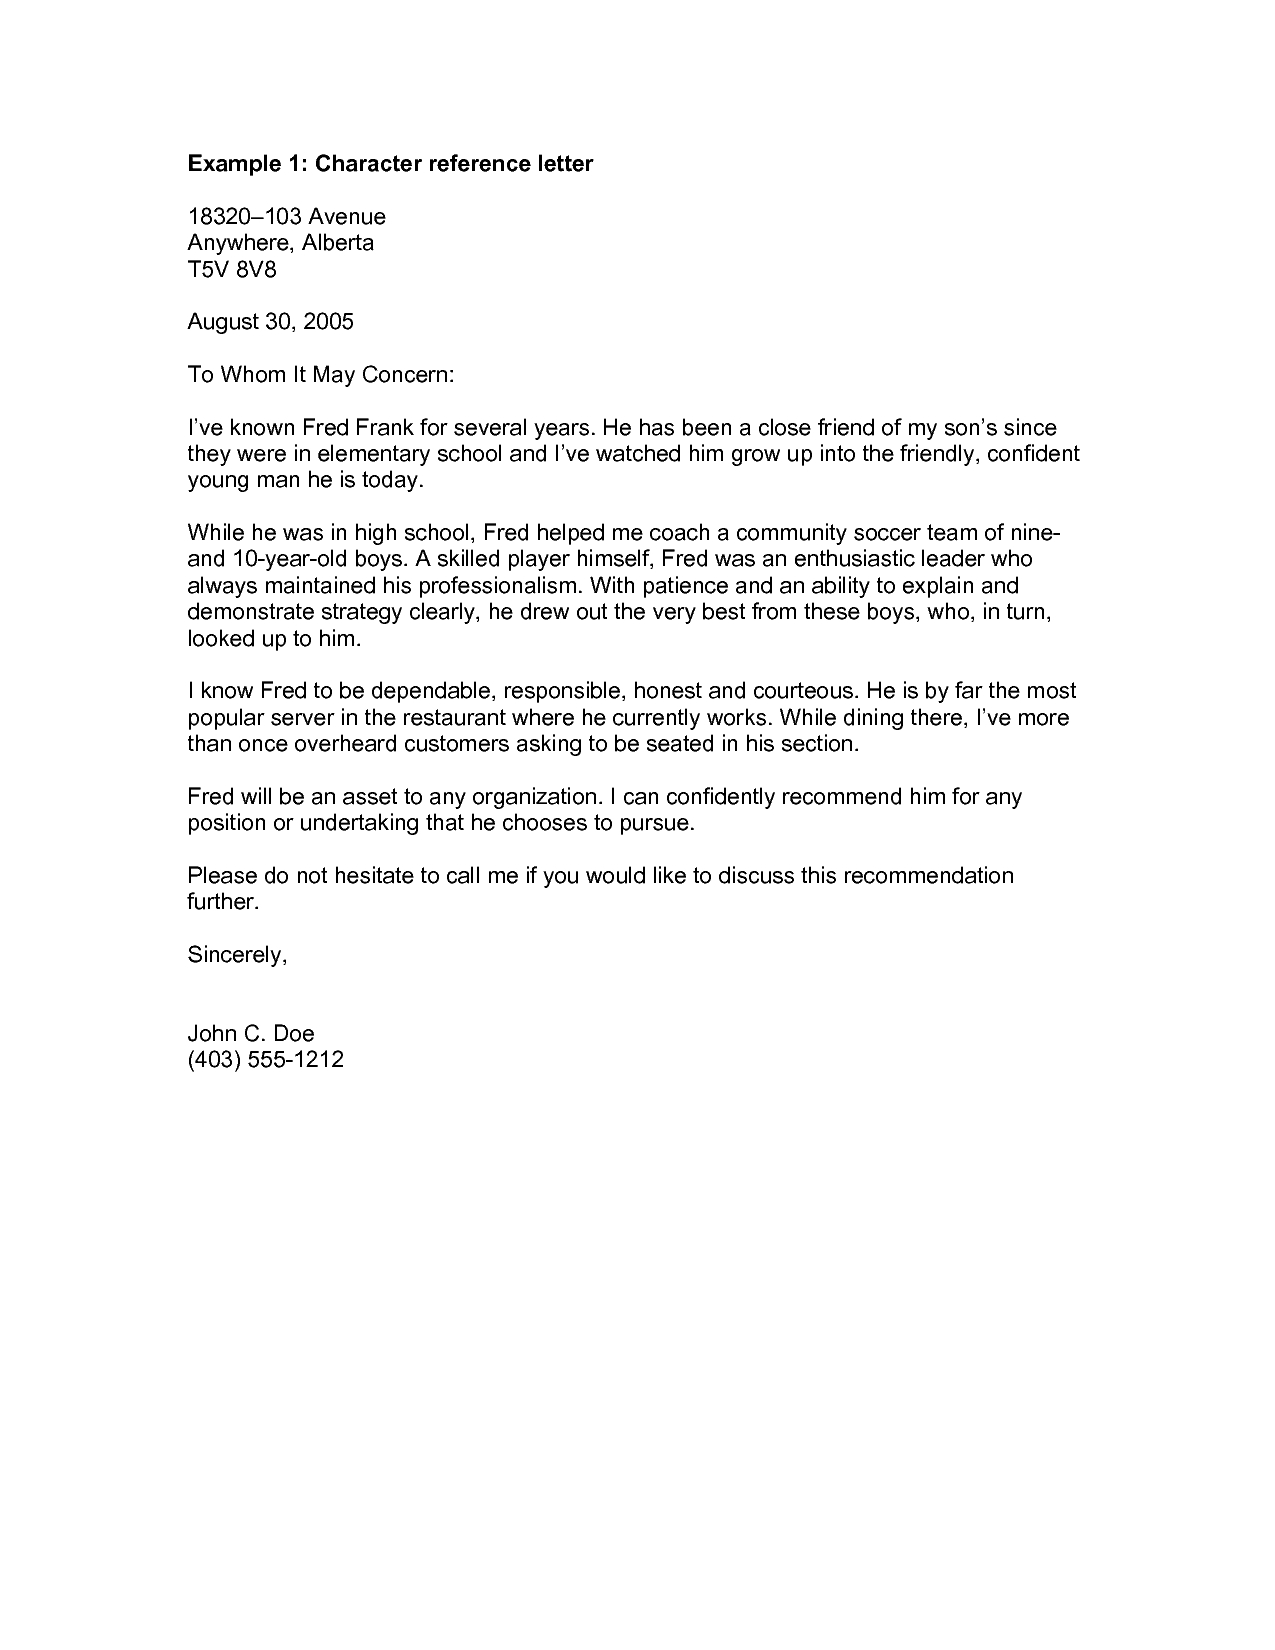 Letter Of Recommendation for Yourself Template - Re Mendation Letter for A Friend Template Opengovpartnersorgletter